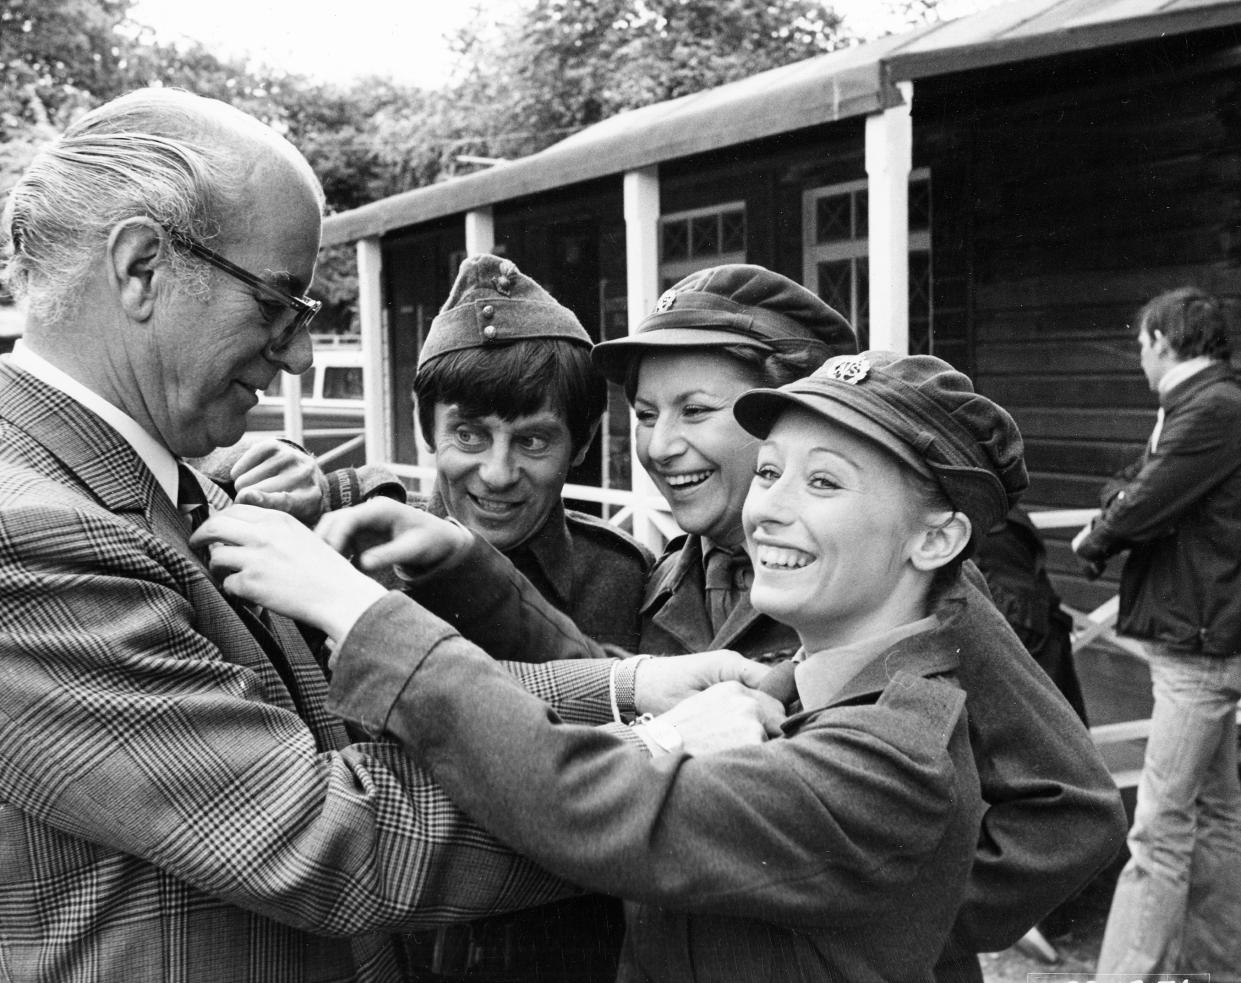 Louise Burton on the set of Carry On England with Producer Peter Rogers. (Peter Rogers Productions/ITV)